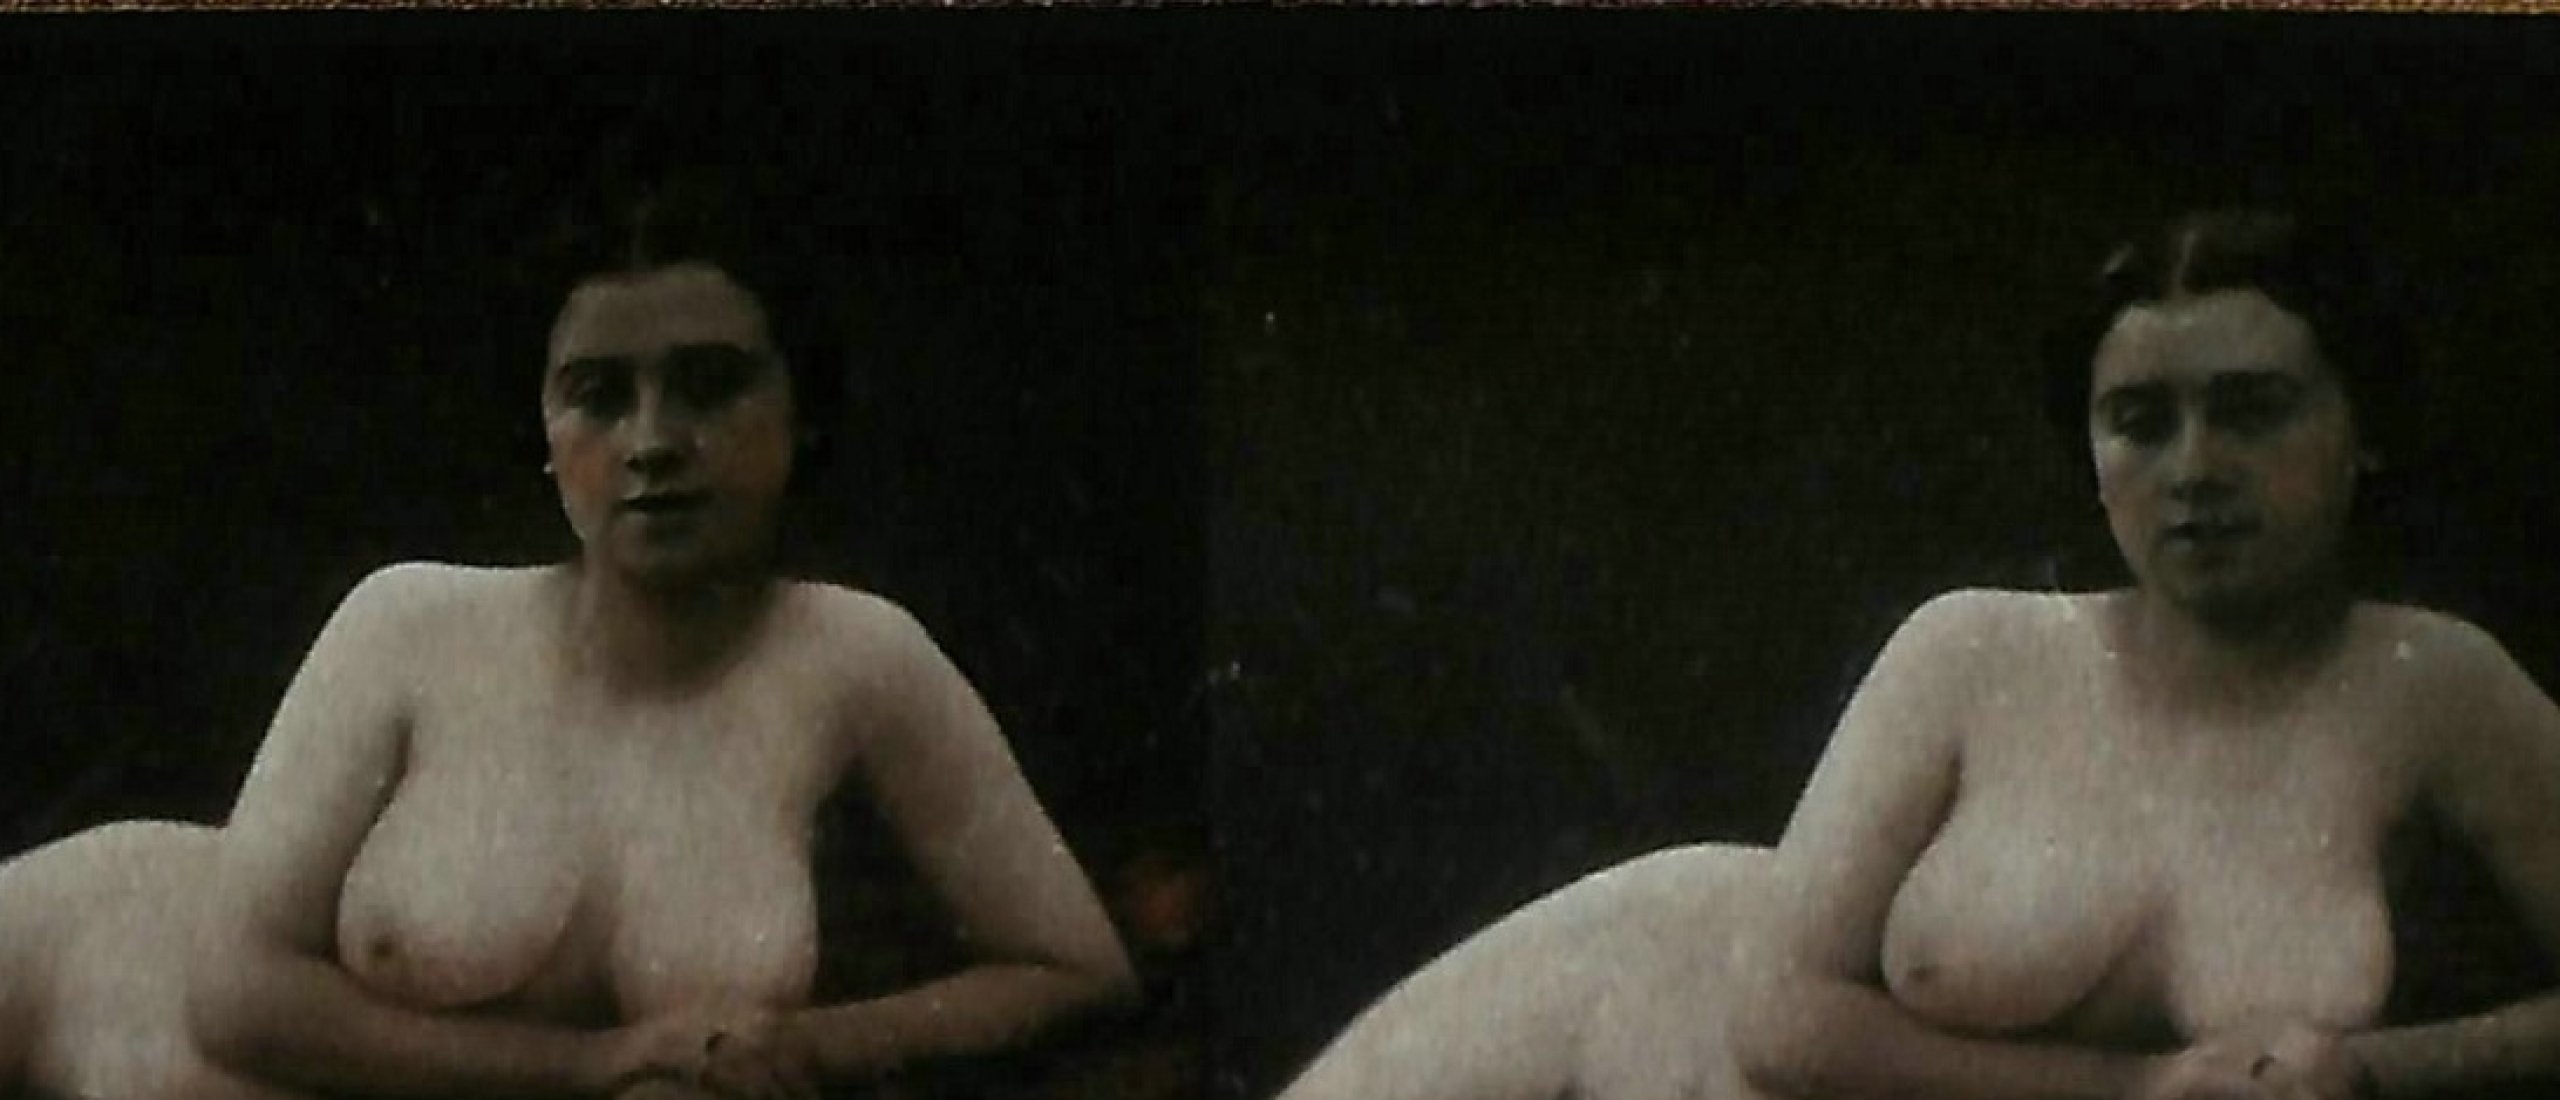 3D Obscenity in Stereoscopic Erotic Images